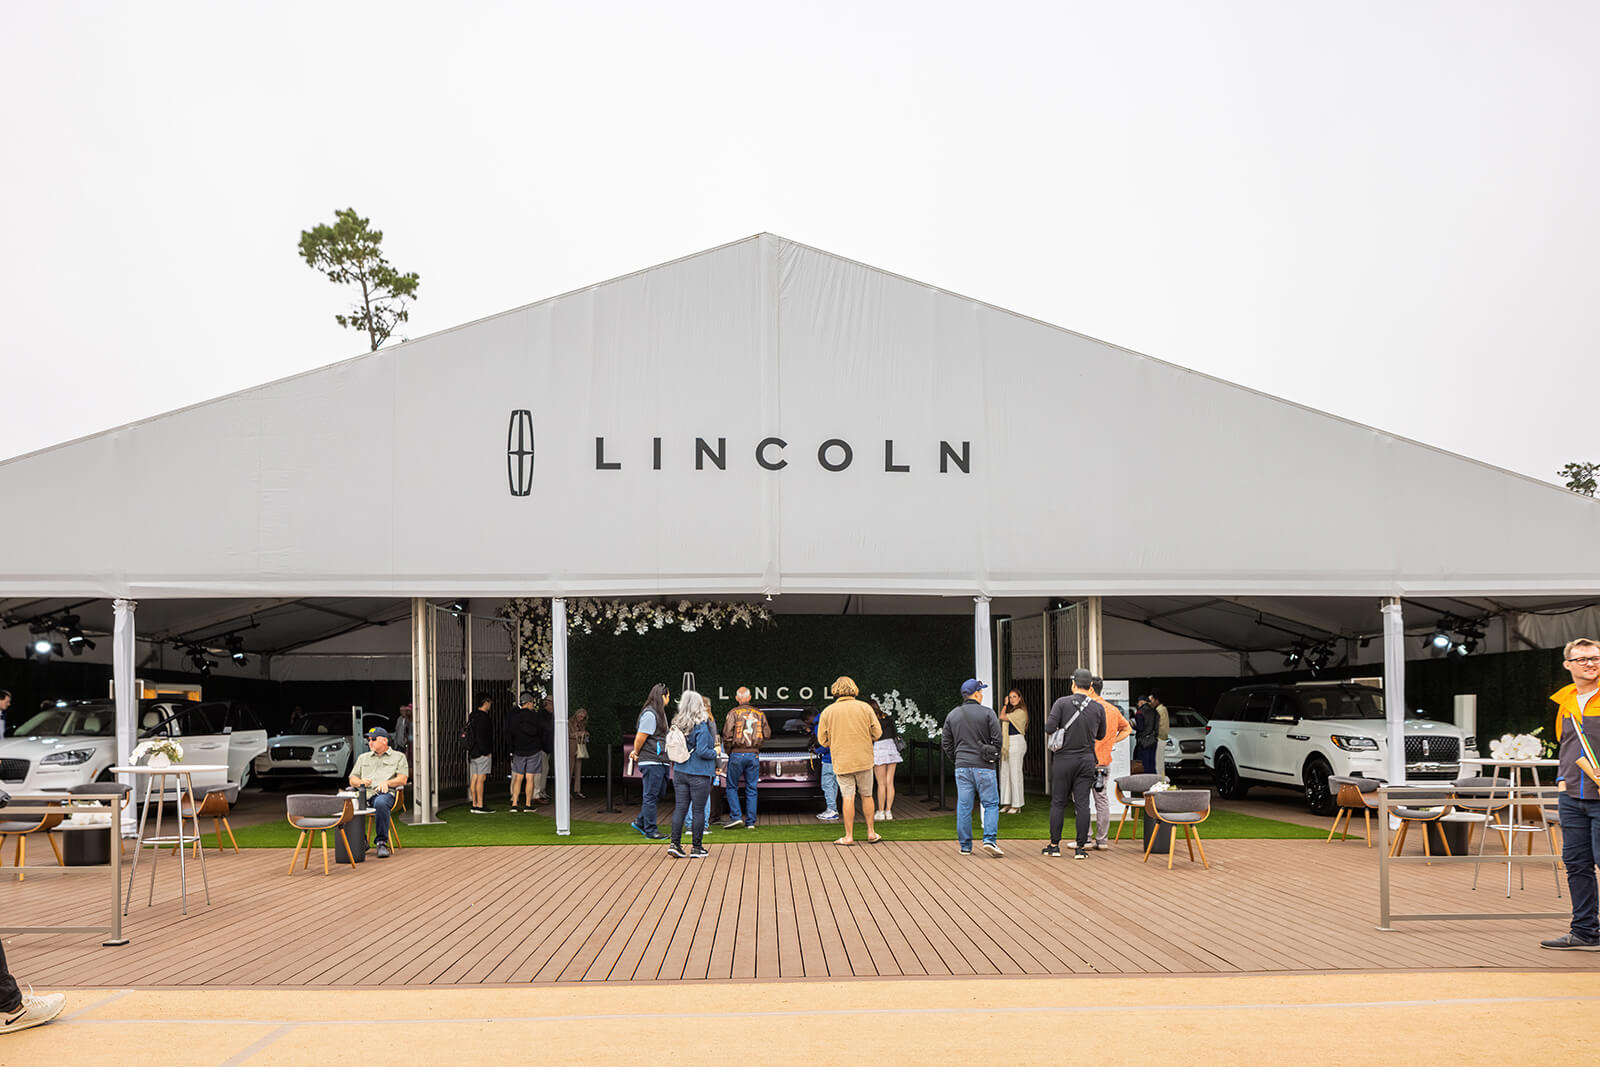 Lincoln Display at the at Pebble Beach Concours